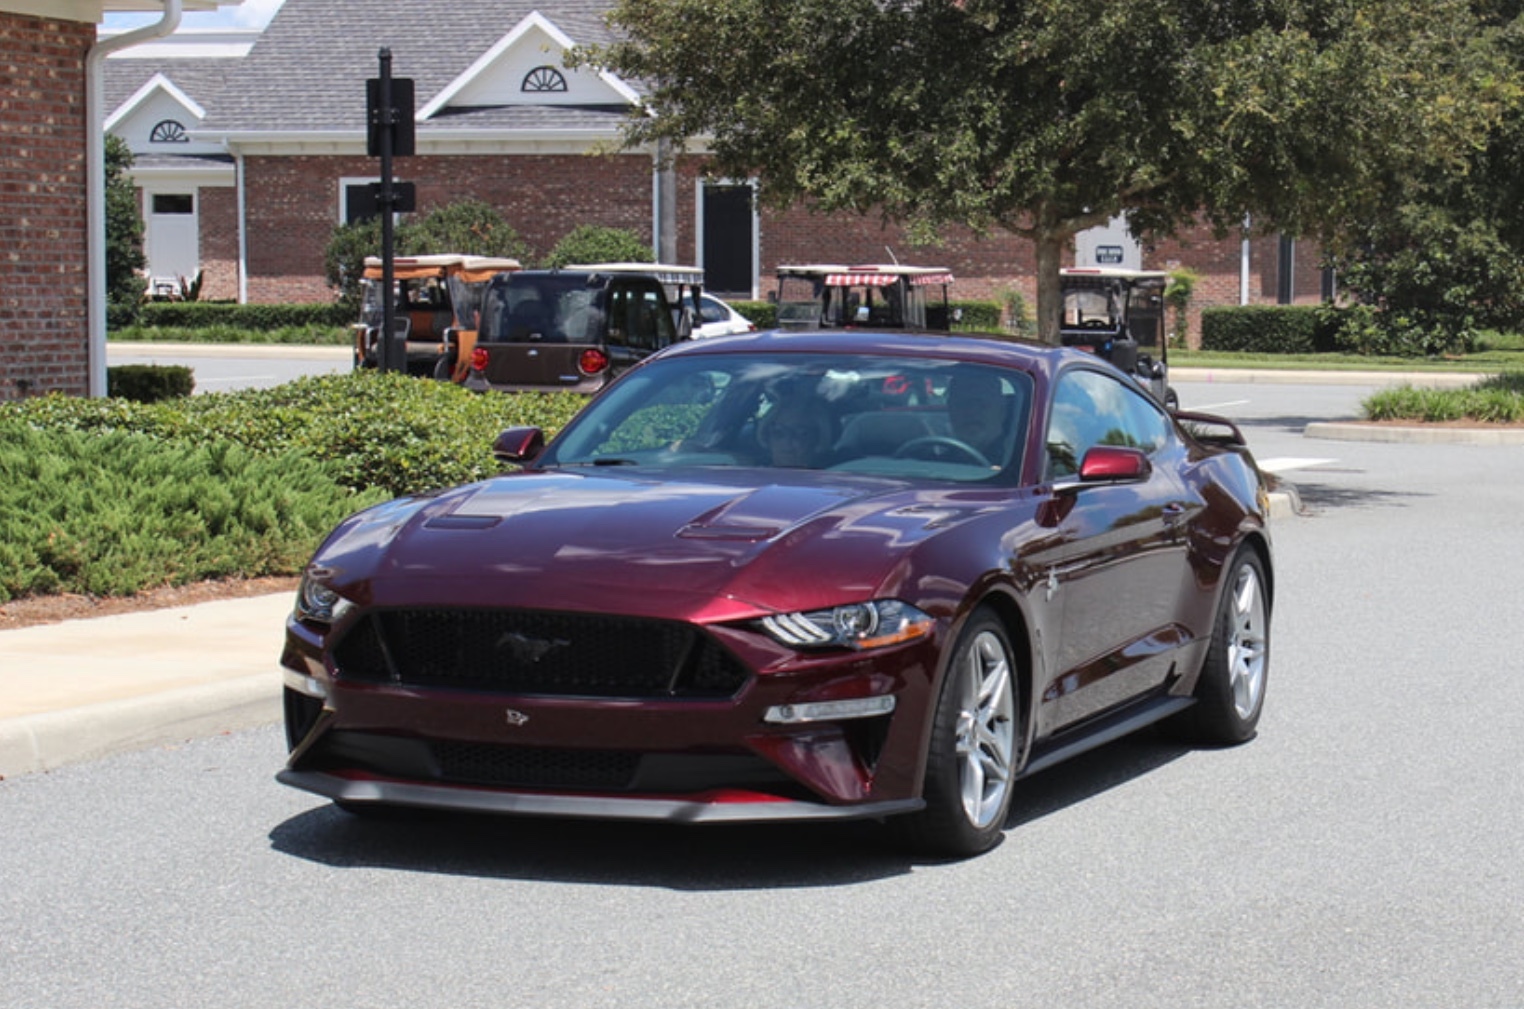  Royal Crimson   2018 Ford Mustang GT PP1 Auto